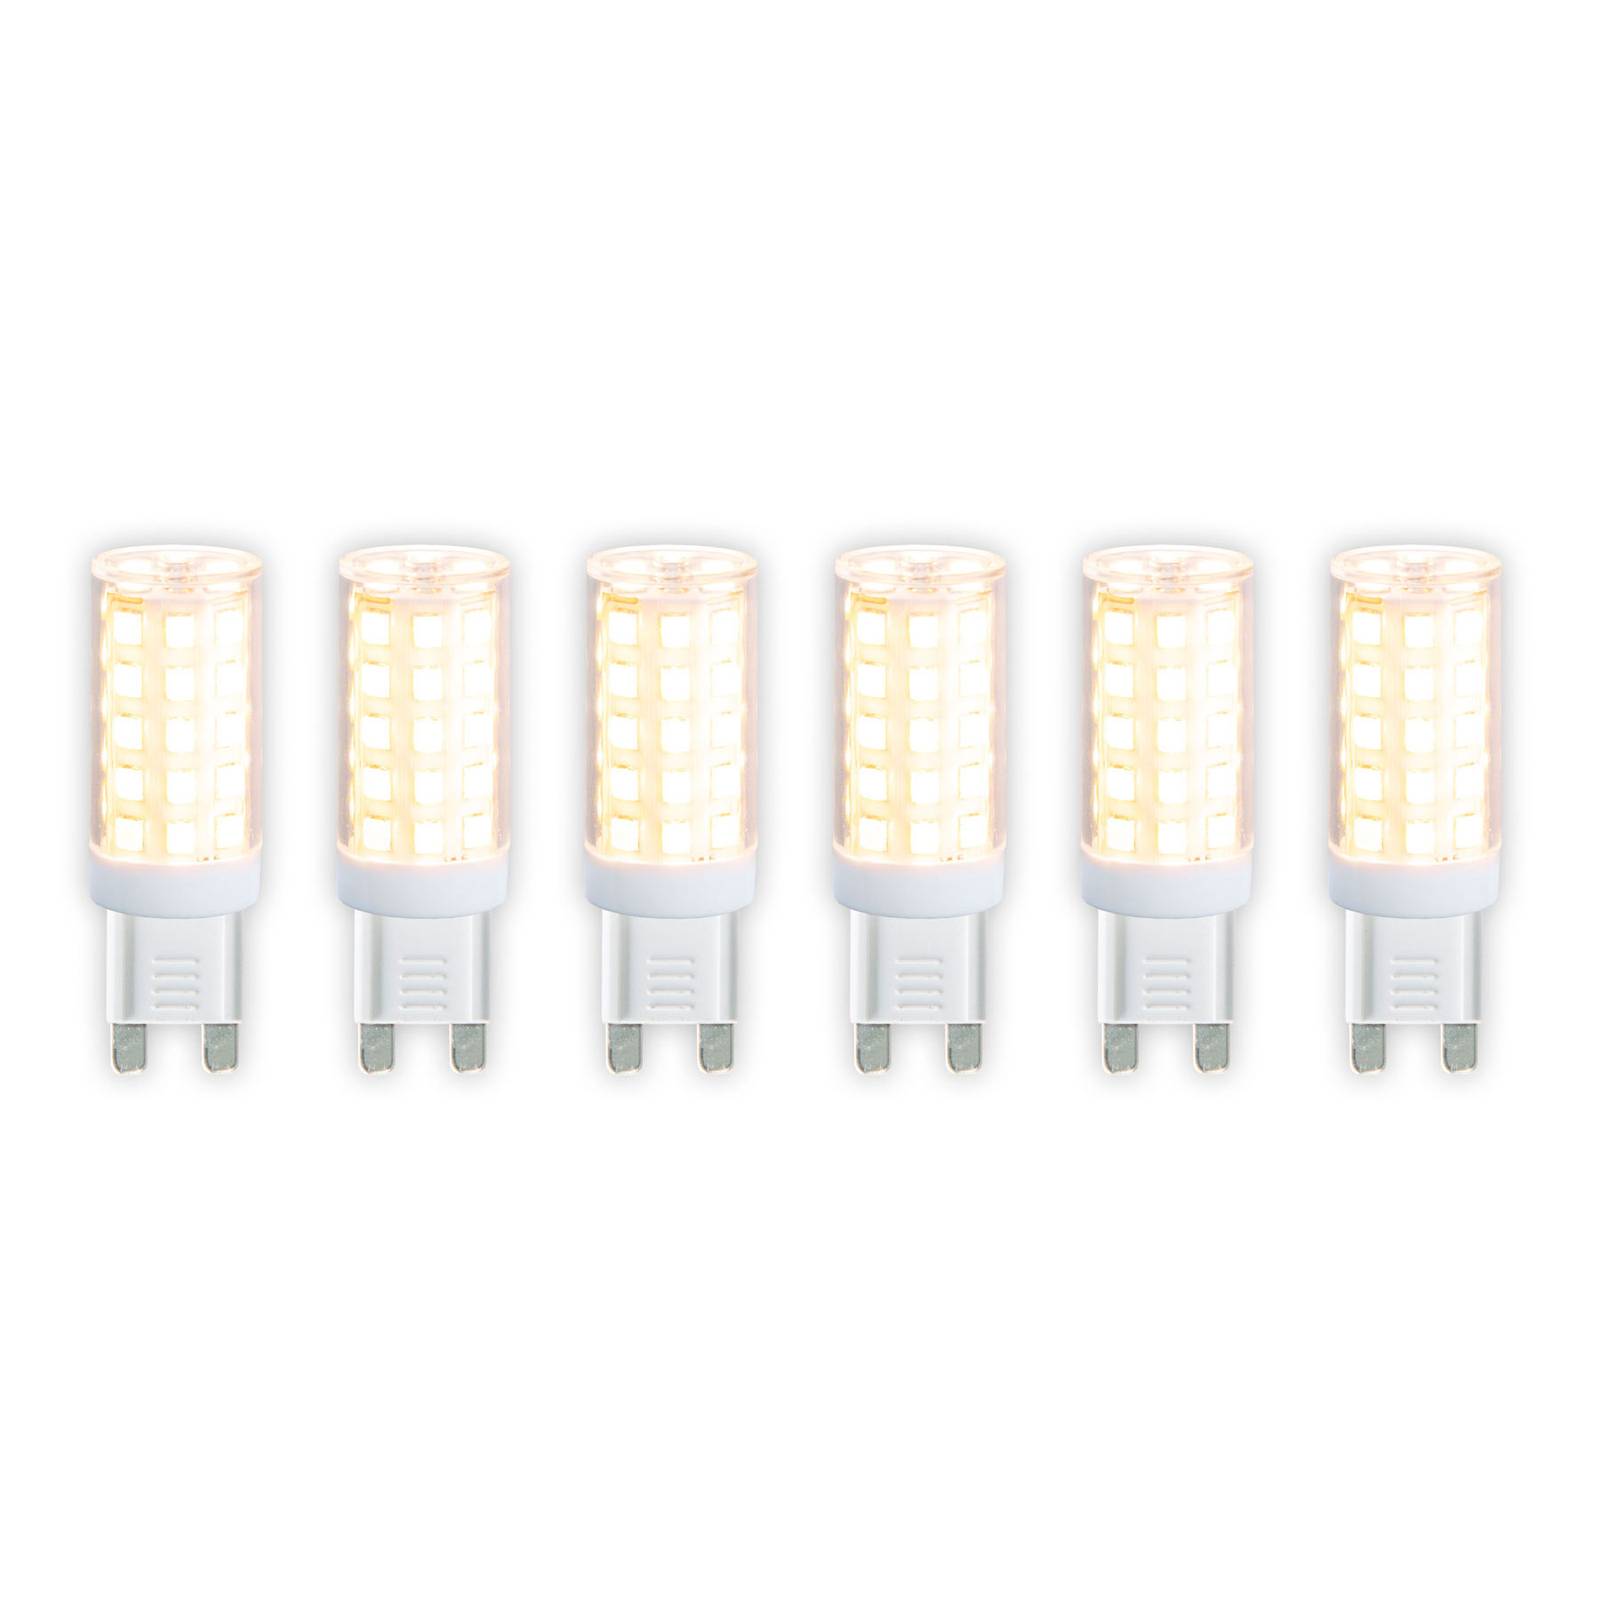 Image of Ampoule broche LED G9 5,5W blanc chaud, 557 lm x6 4003222883204